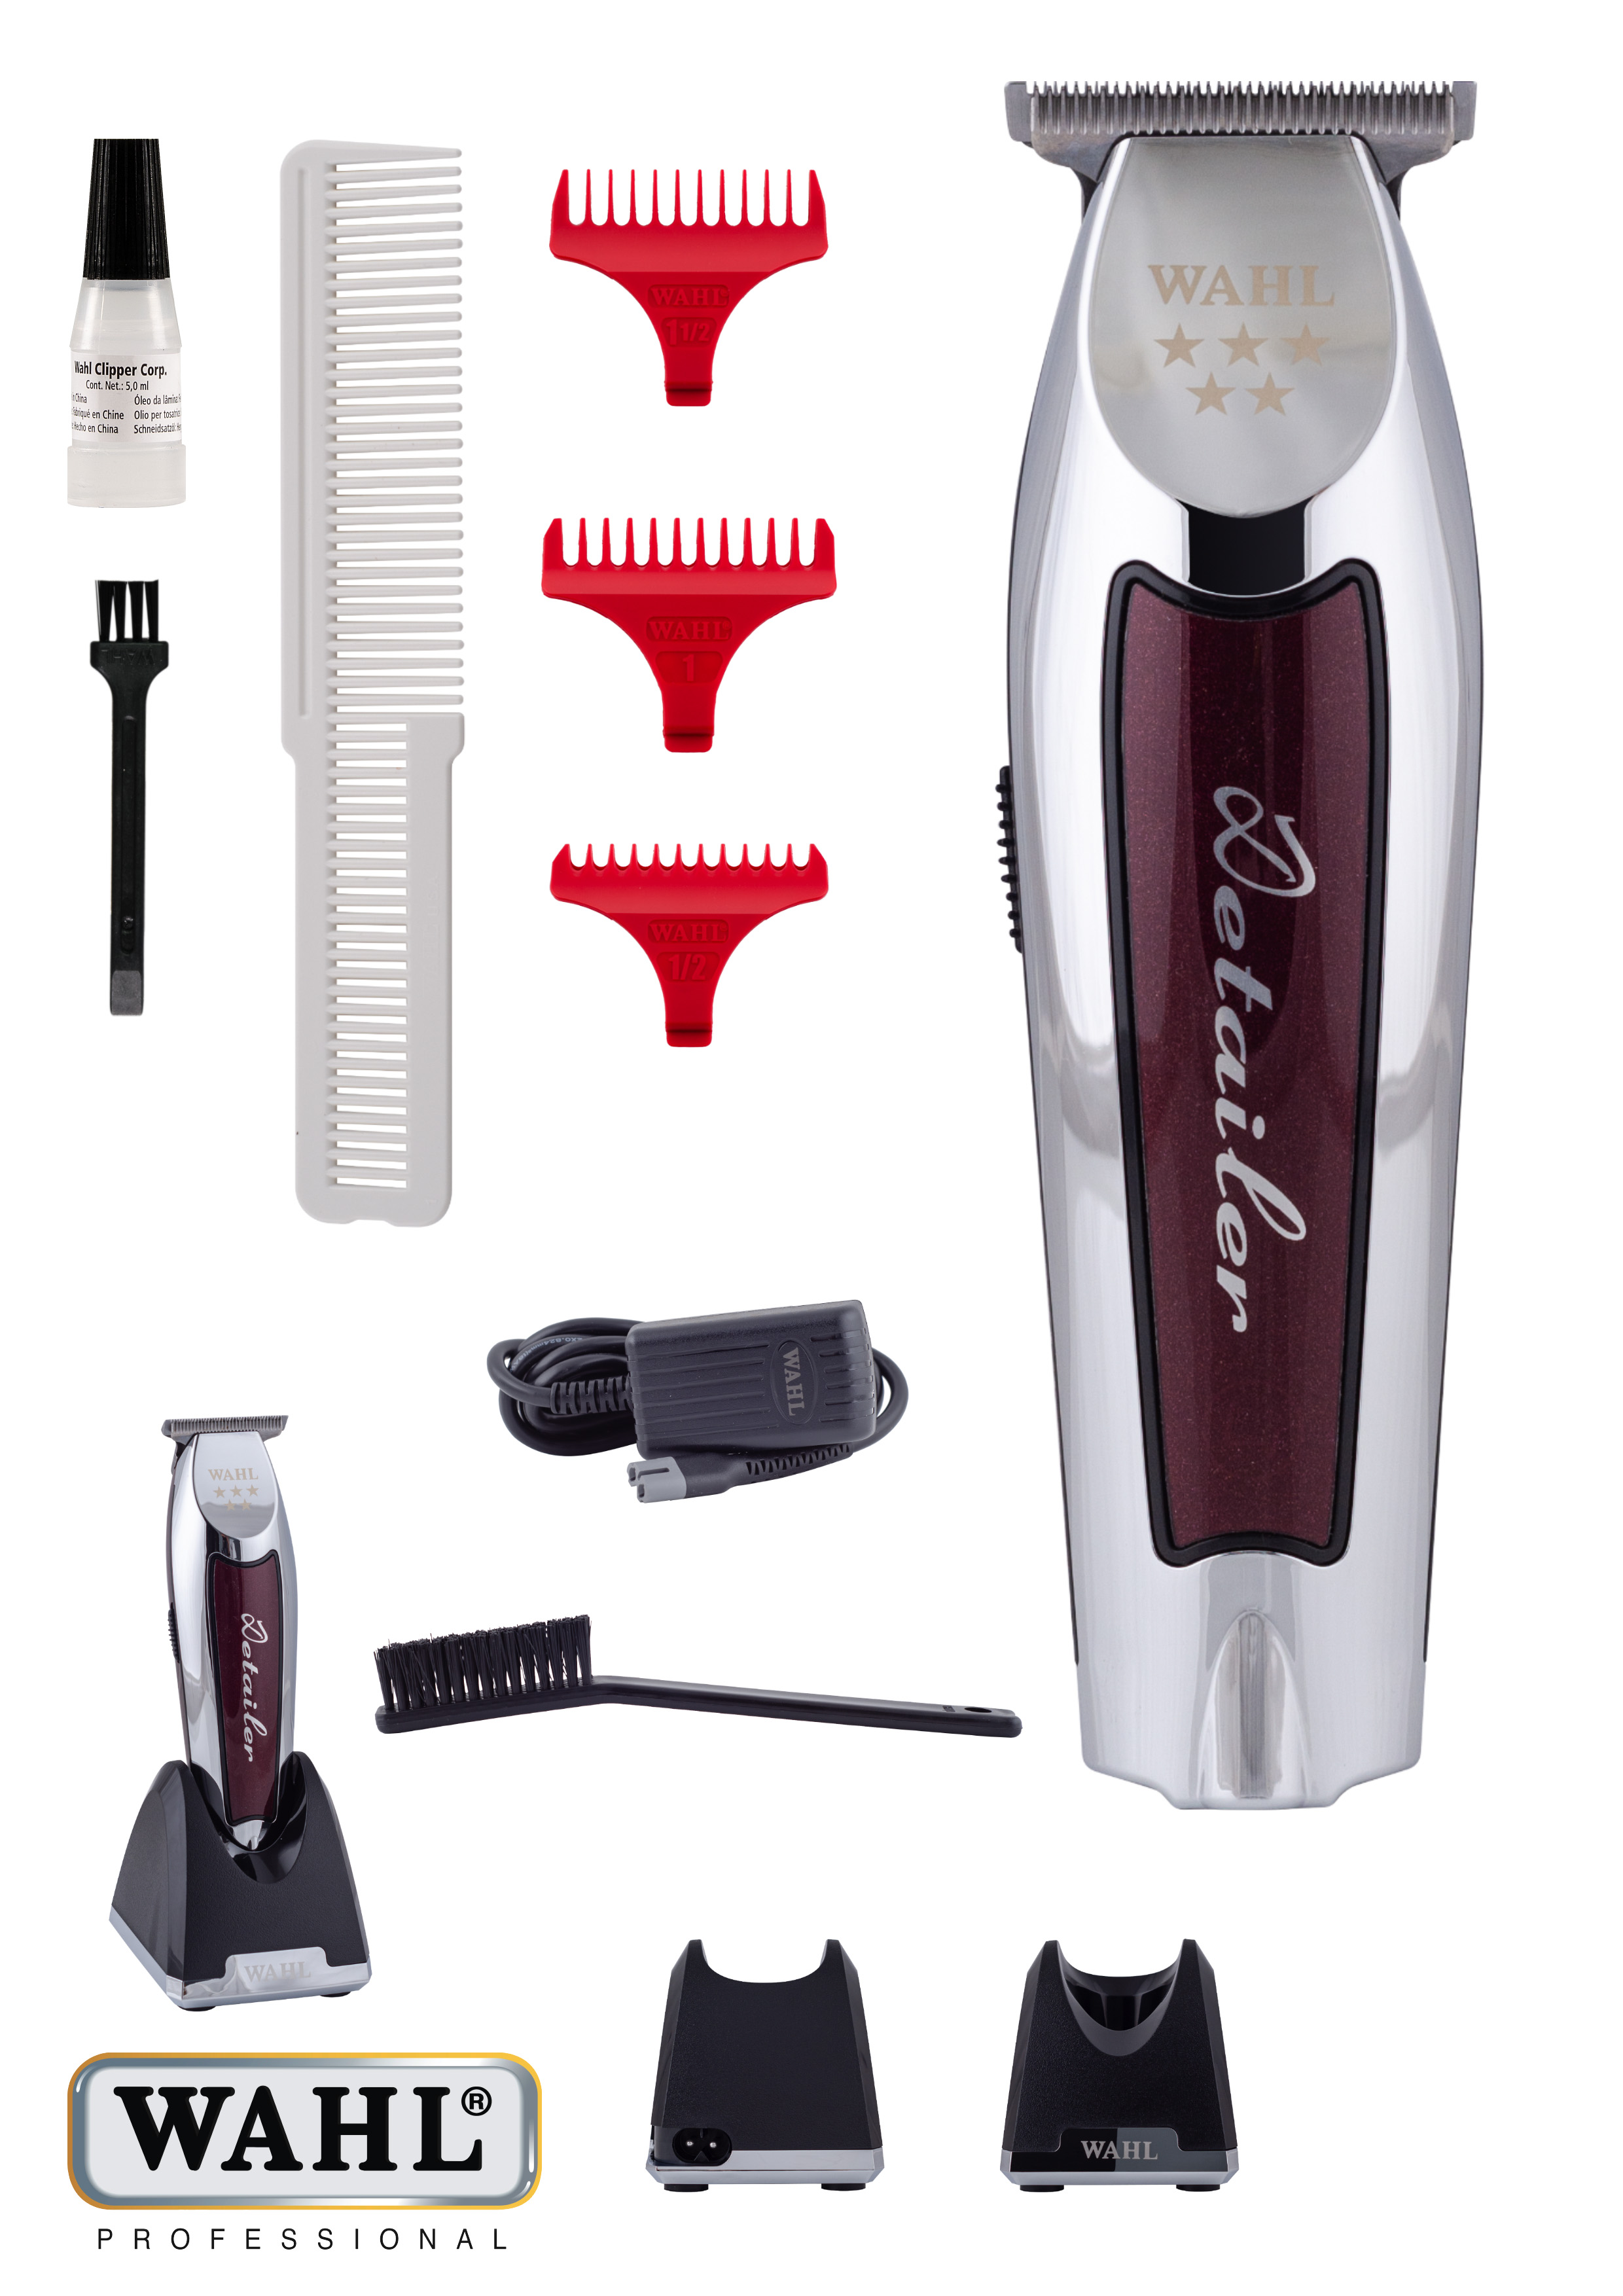  Wahl Professional 5 Star Detailer Trimmer with